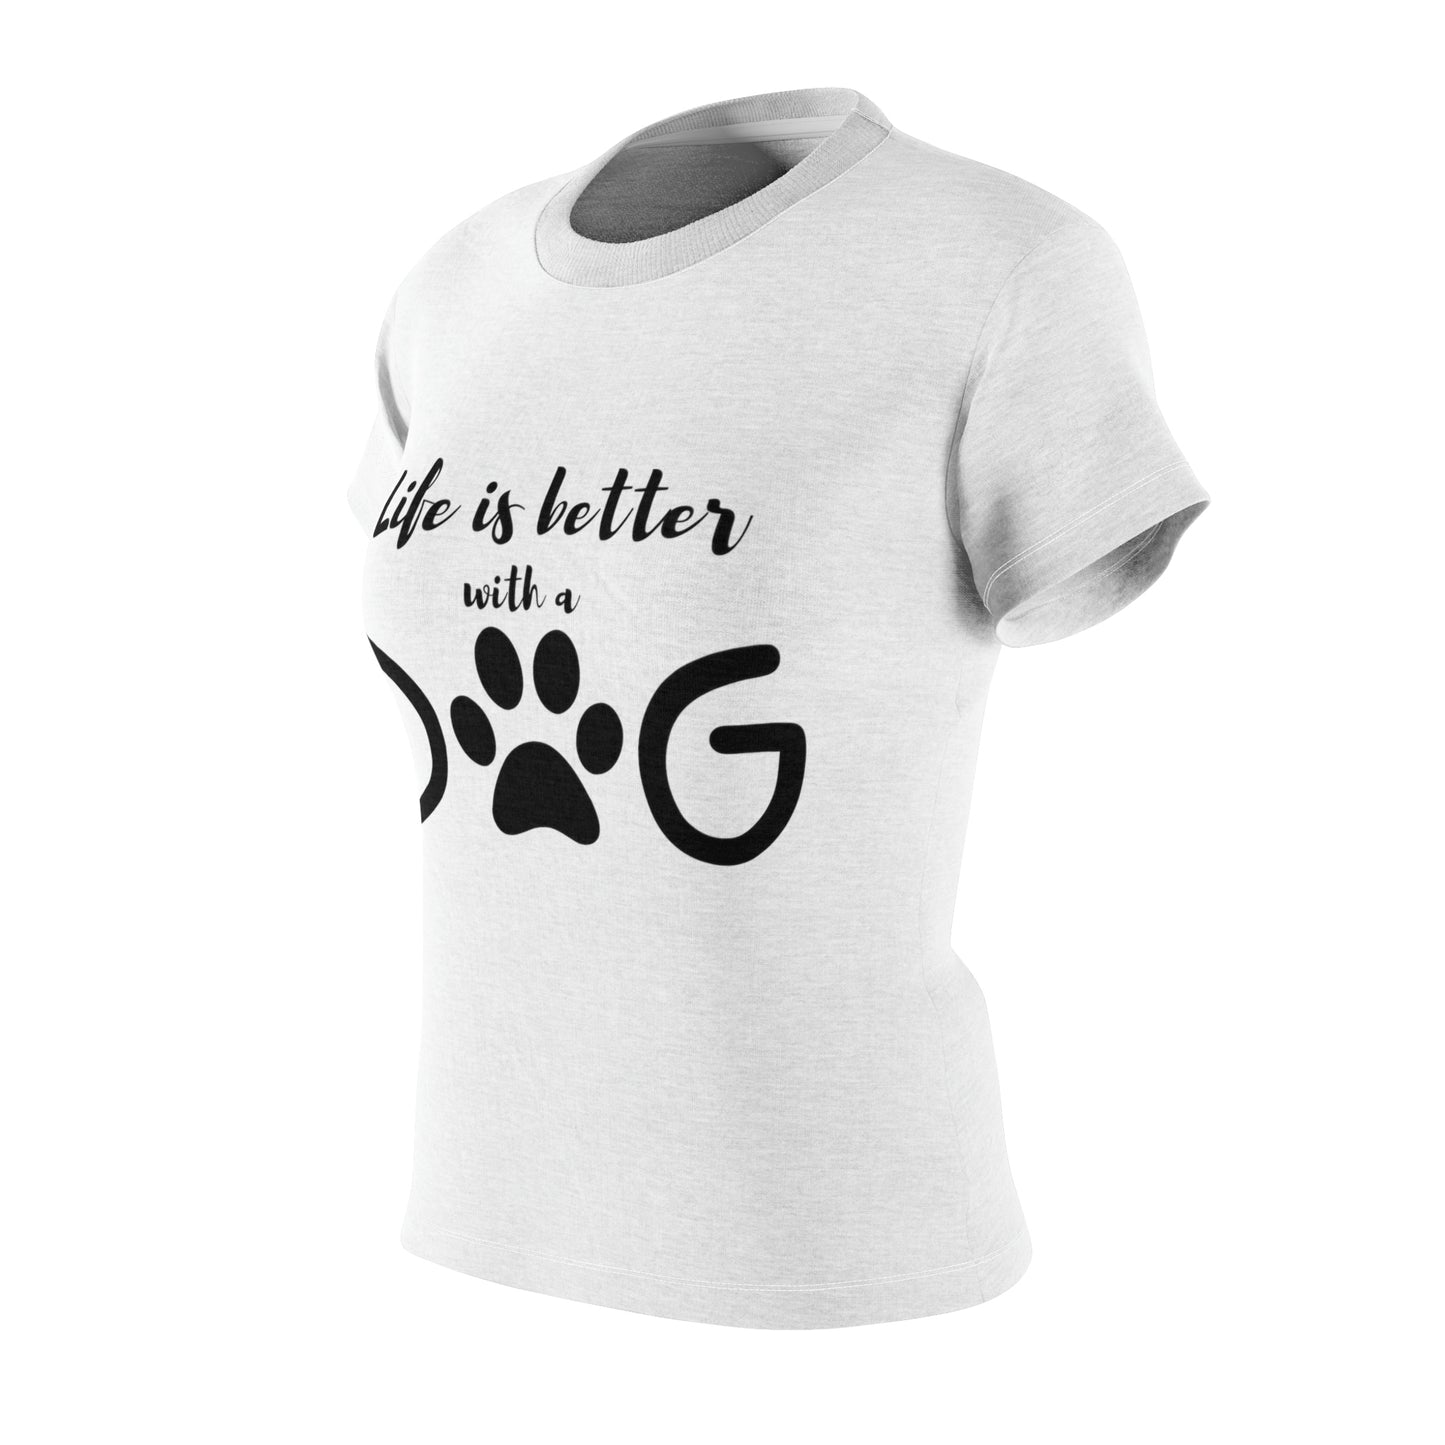 Word Art Collection - Women's Cut & Sew Tee (AOP) - Life is Better with a Dog in White